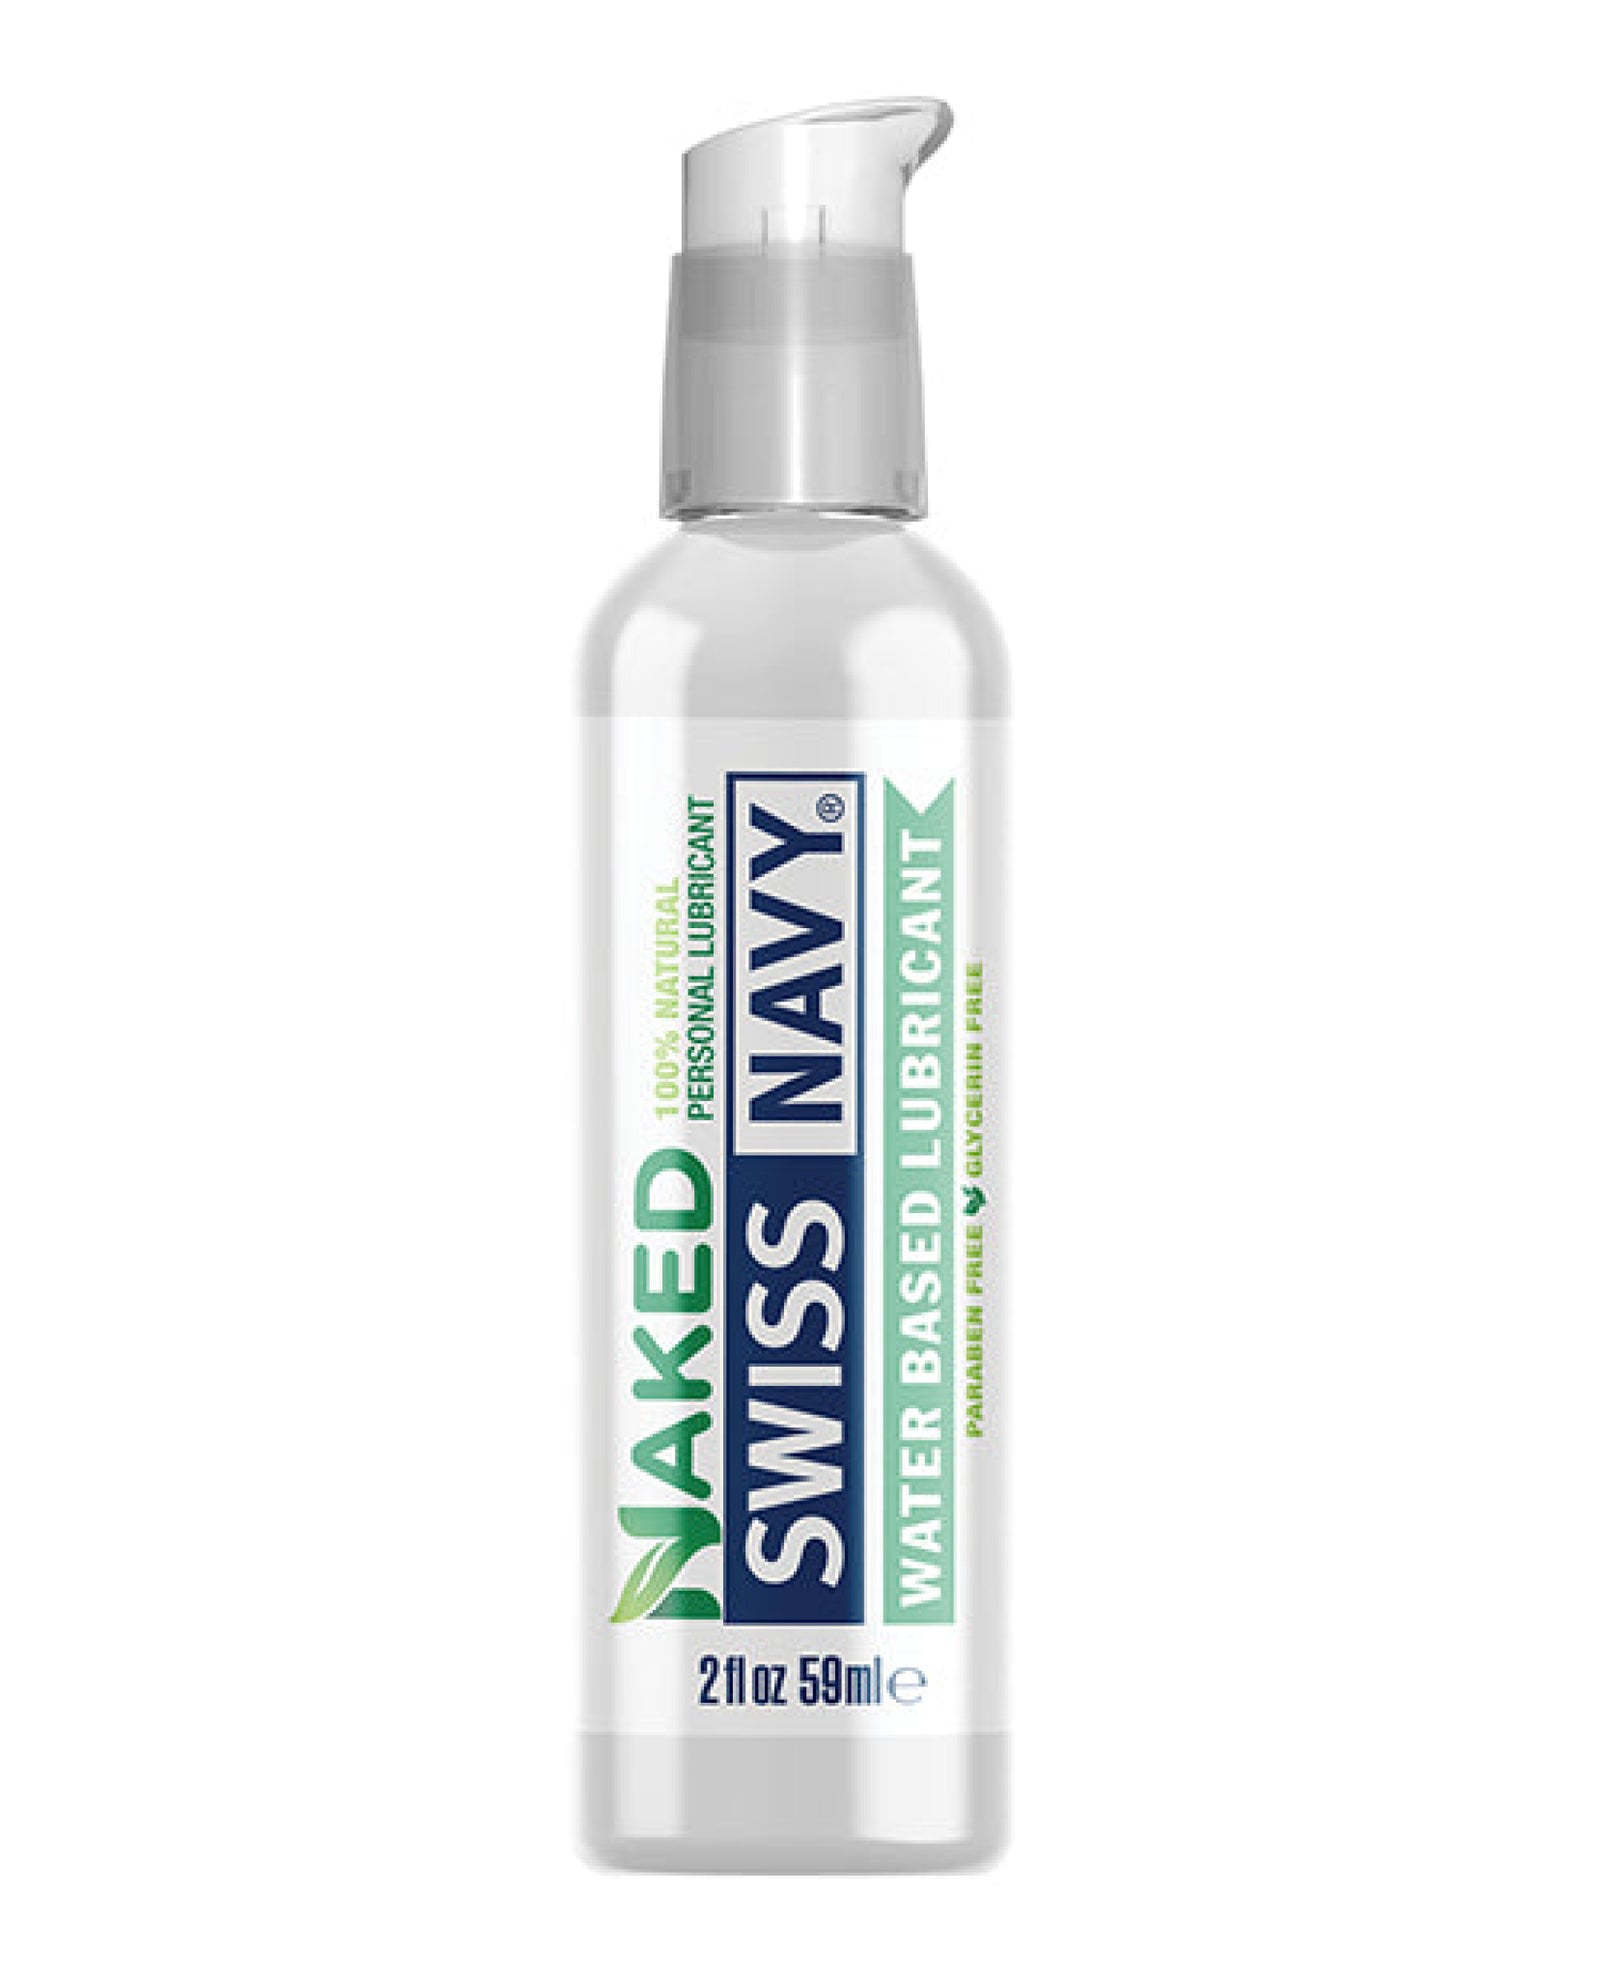 Swiss Navy Naked All Natural Lubricant Swiss Navy